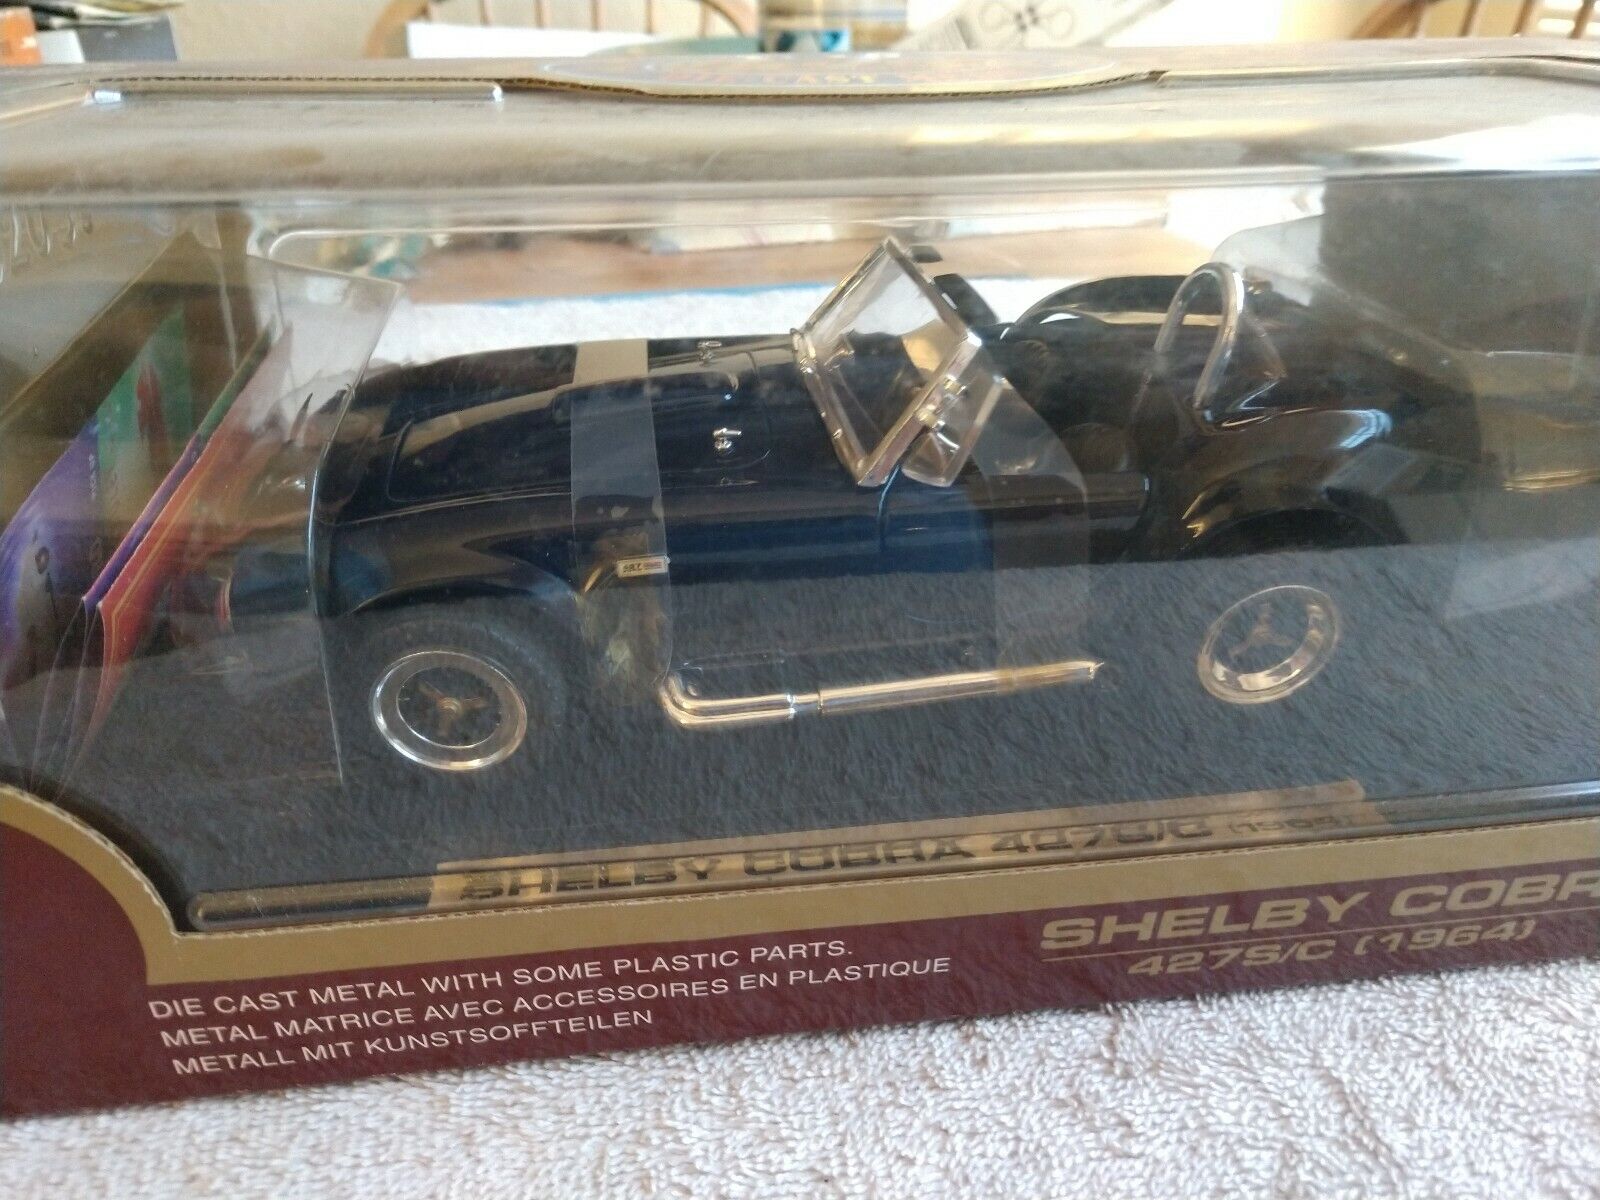 1964 Shelby Cobra 427 S/C Black 1/18” Scale Die-Cast by Road Legends 